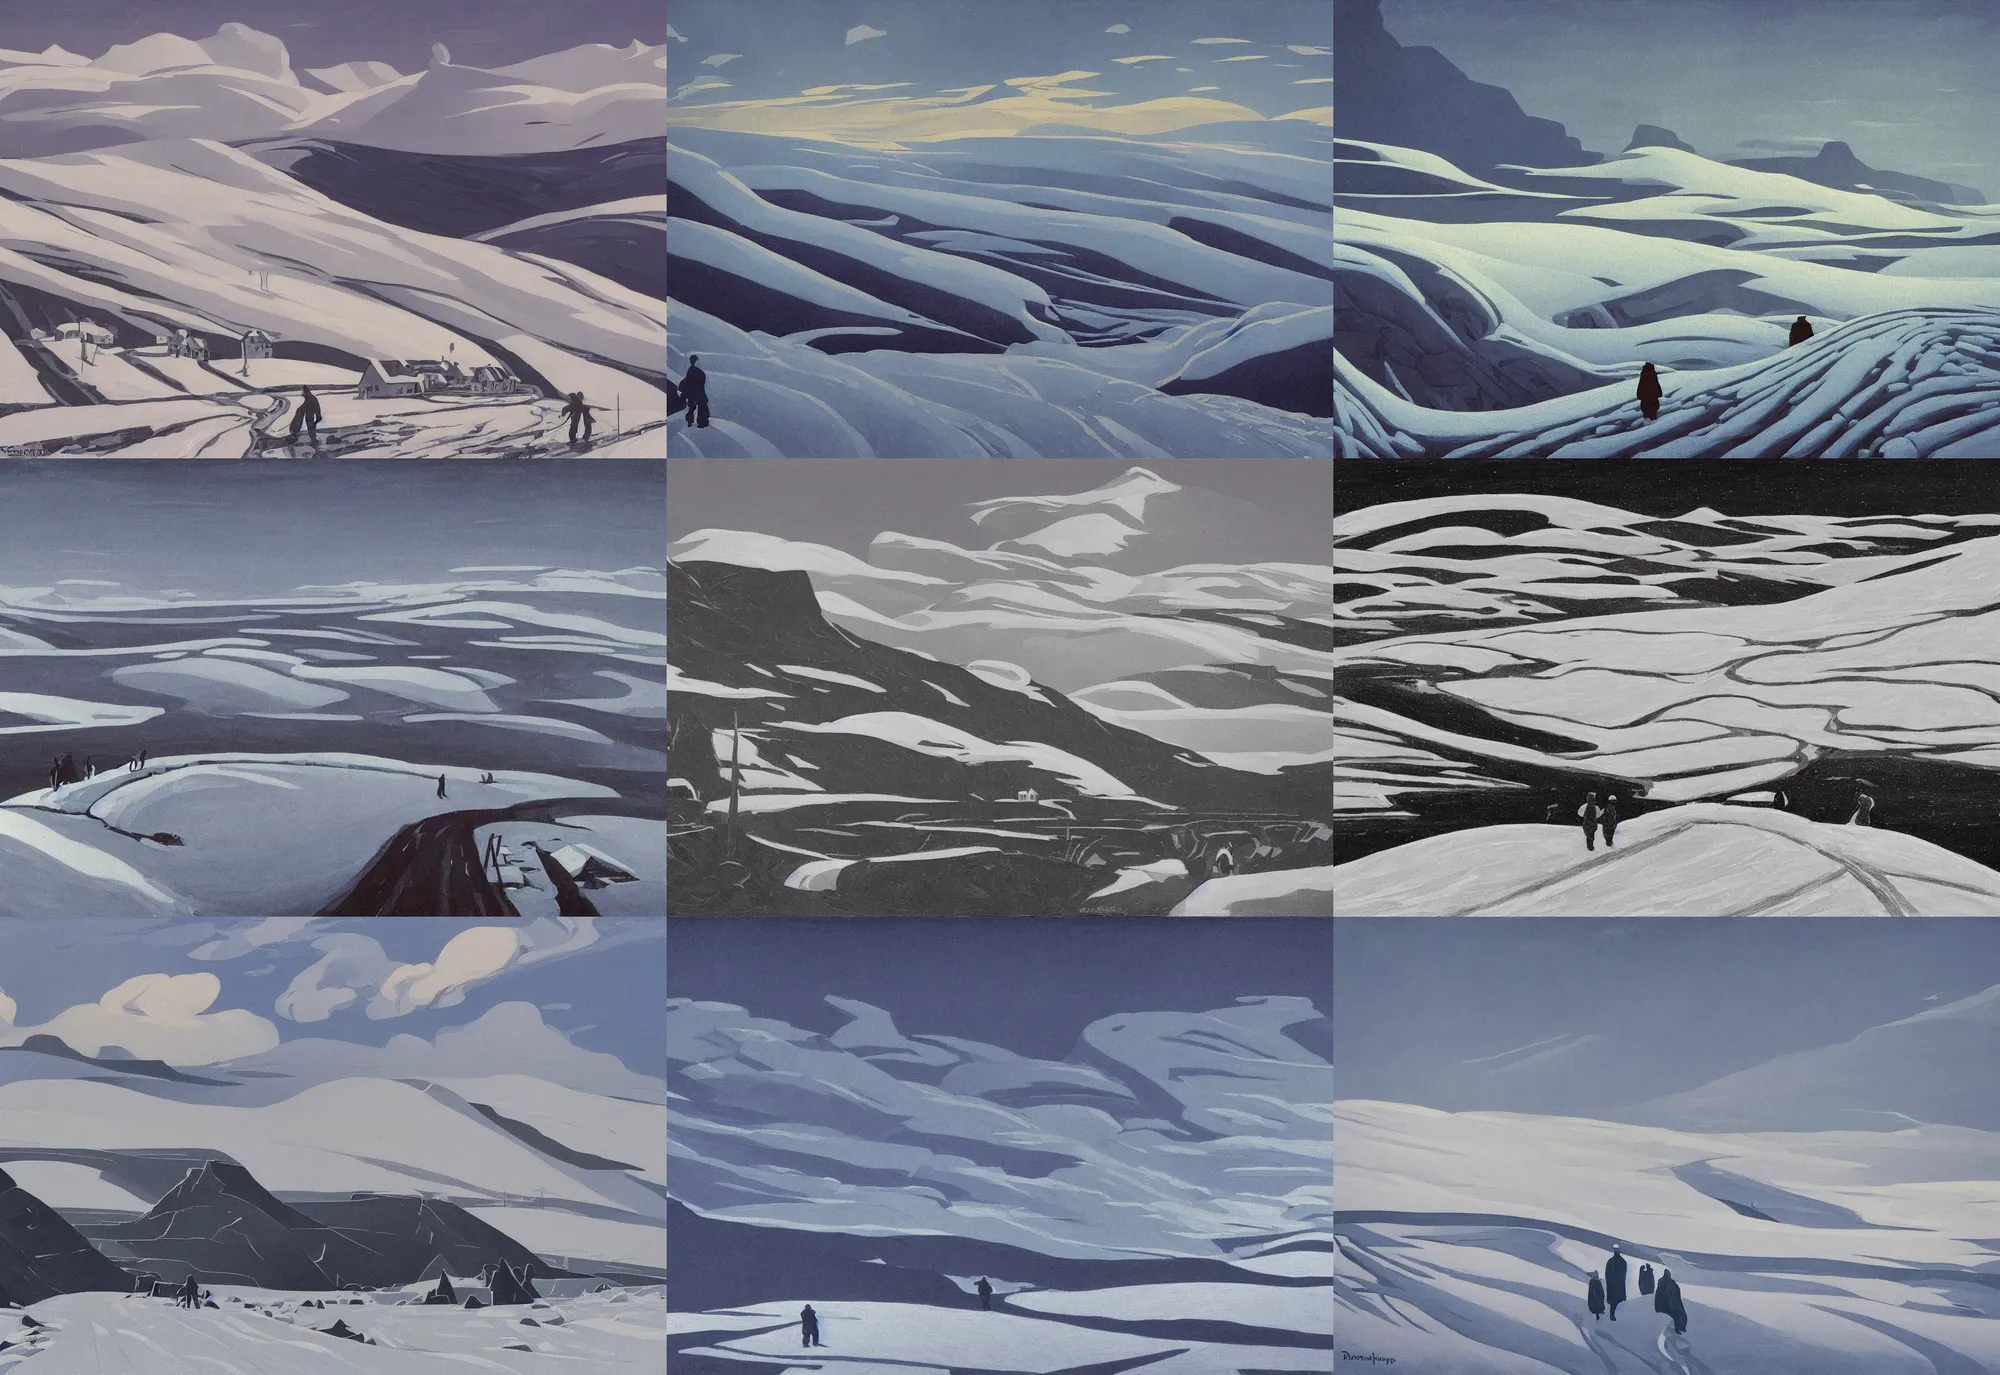 Prompt: travelers have hard track through snowy and iced fields, epic composition, cold, winter landscape, faroe island, cost, clouds, shot from danis villeneuve movie, roger deakins filming, nightfall, soviet artists, painting in the style of Alfred Joseph Casson, painting in the style of Ed Mell, in the style of Phil Buytendorp